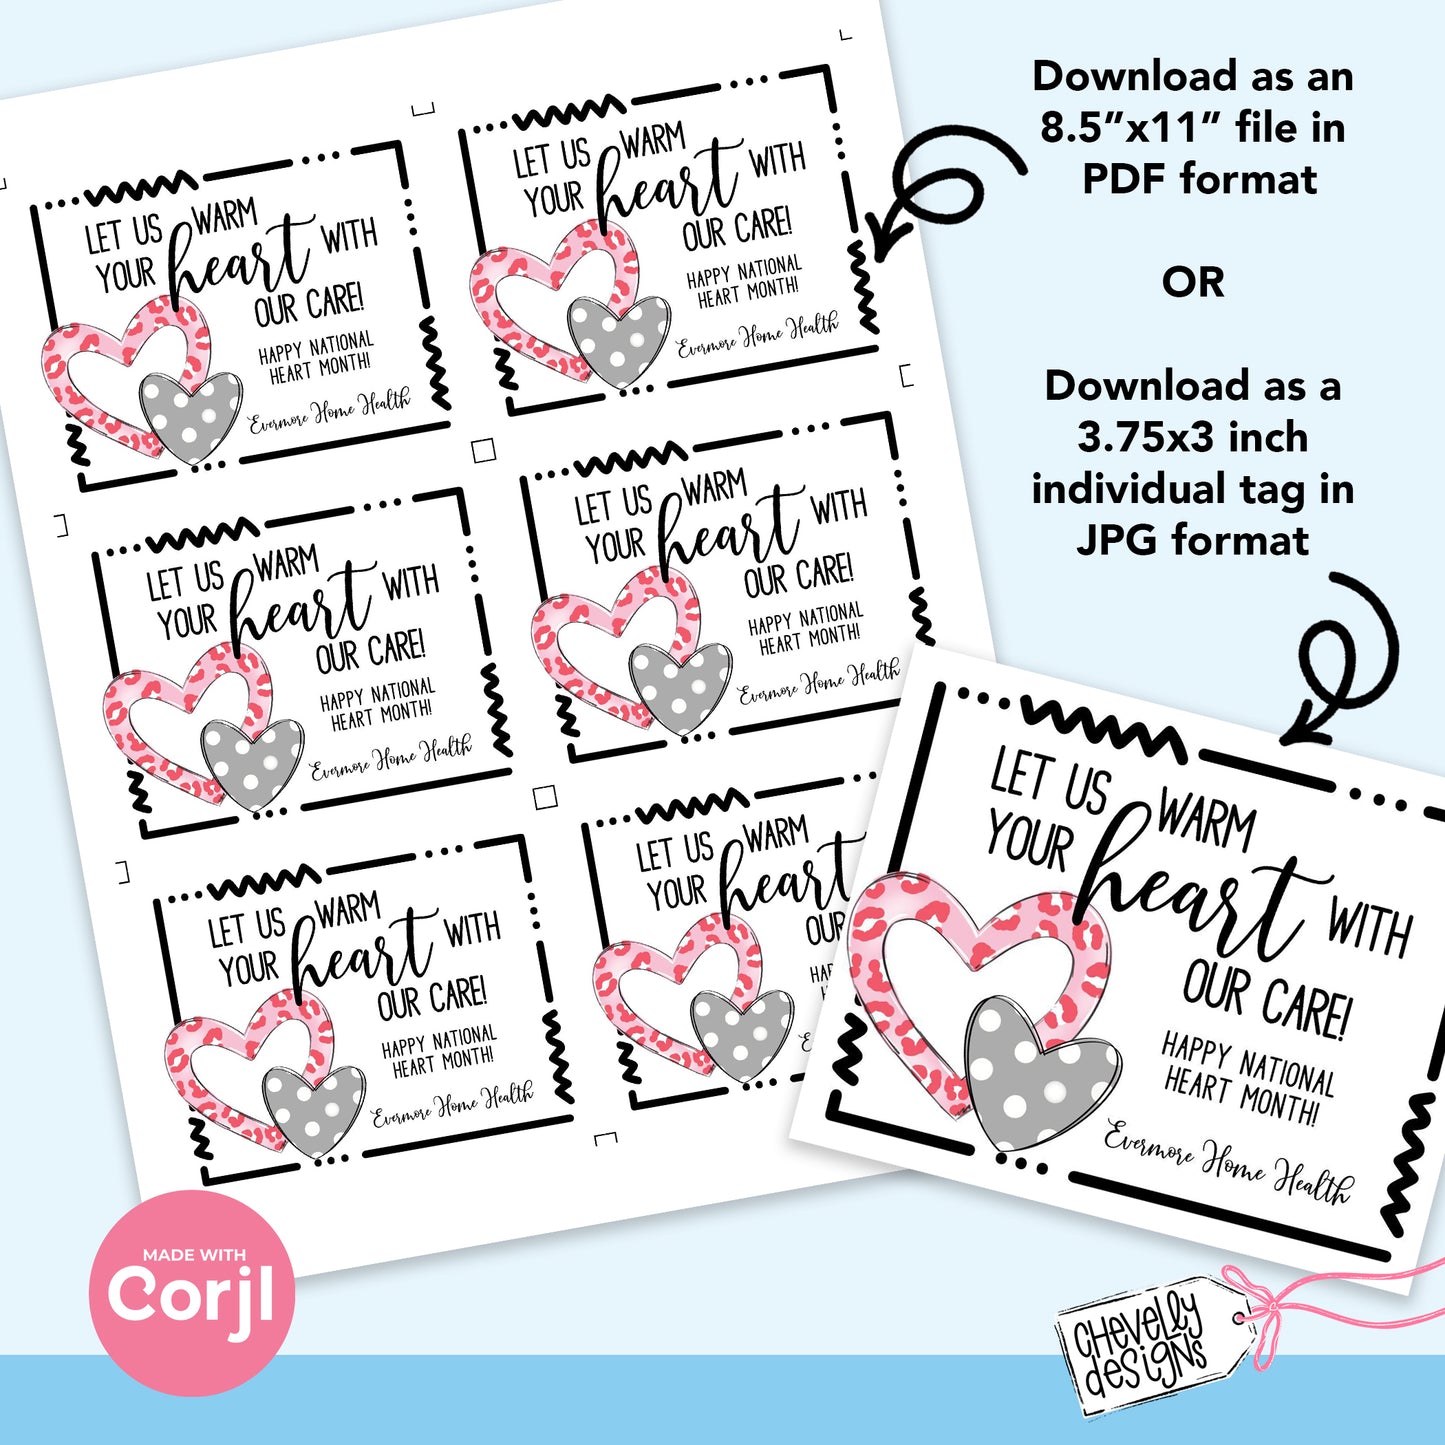 EDITABLE - Warm Your Heart Business Referral Gift Tags - Printable Digital File